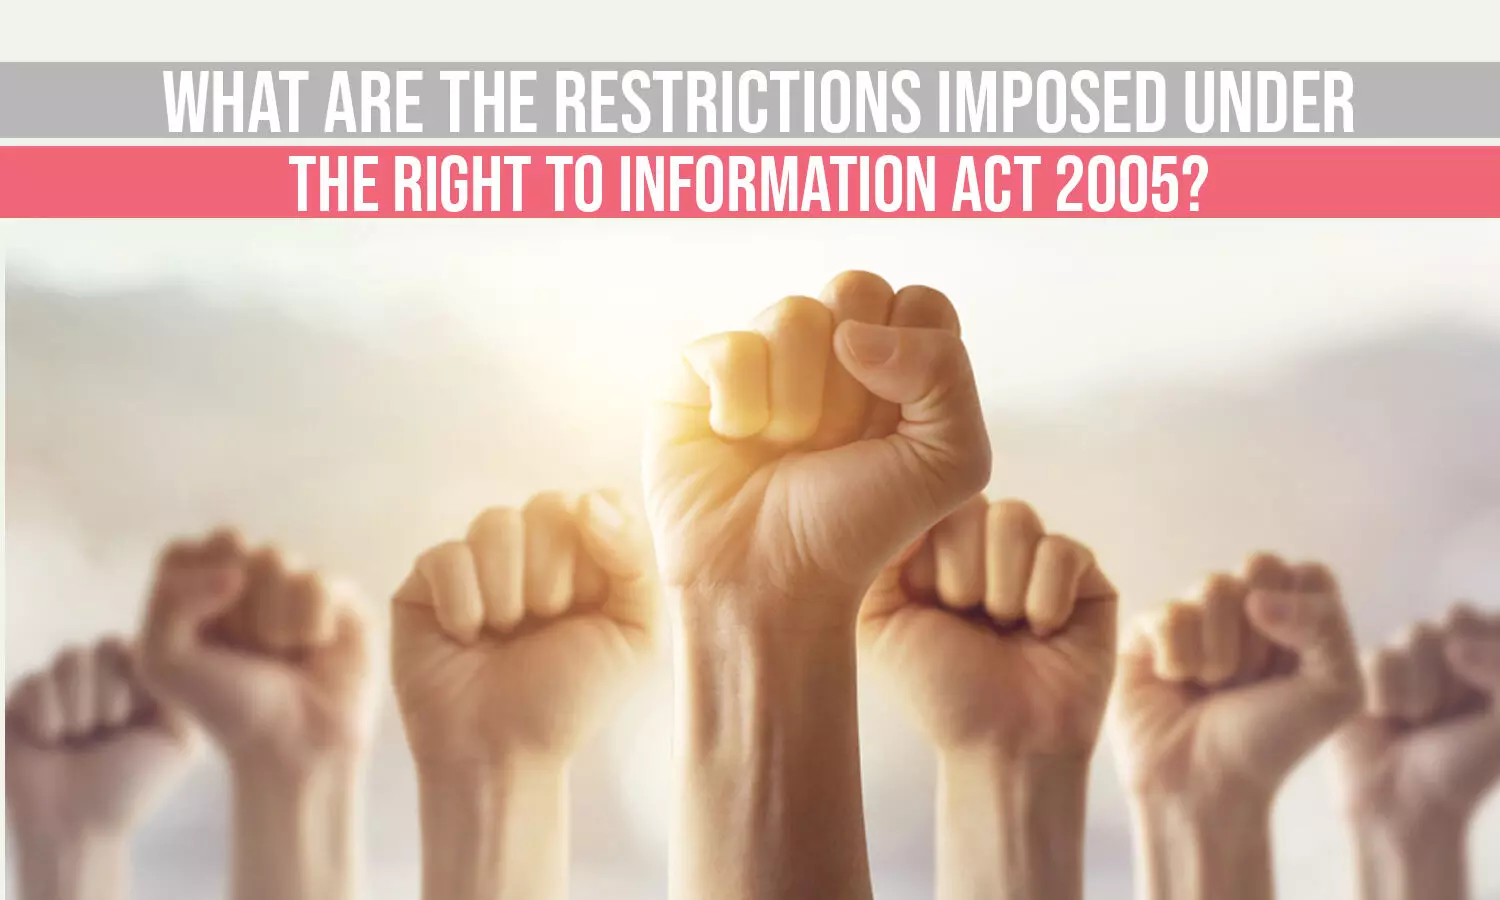 What Are The Restrictions Imposed Under The Right to Information Act 2005?